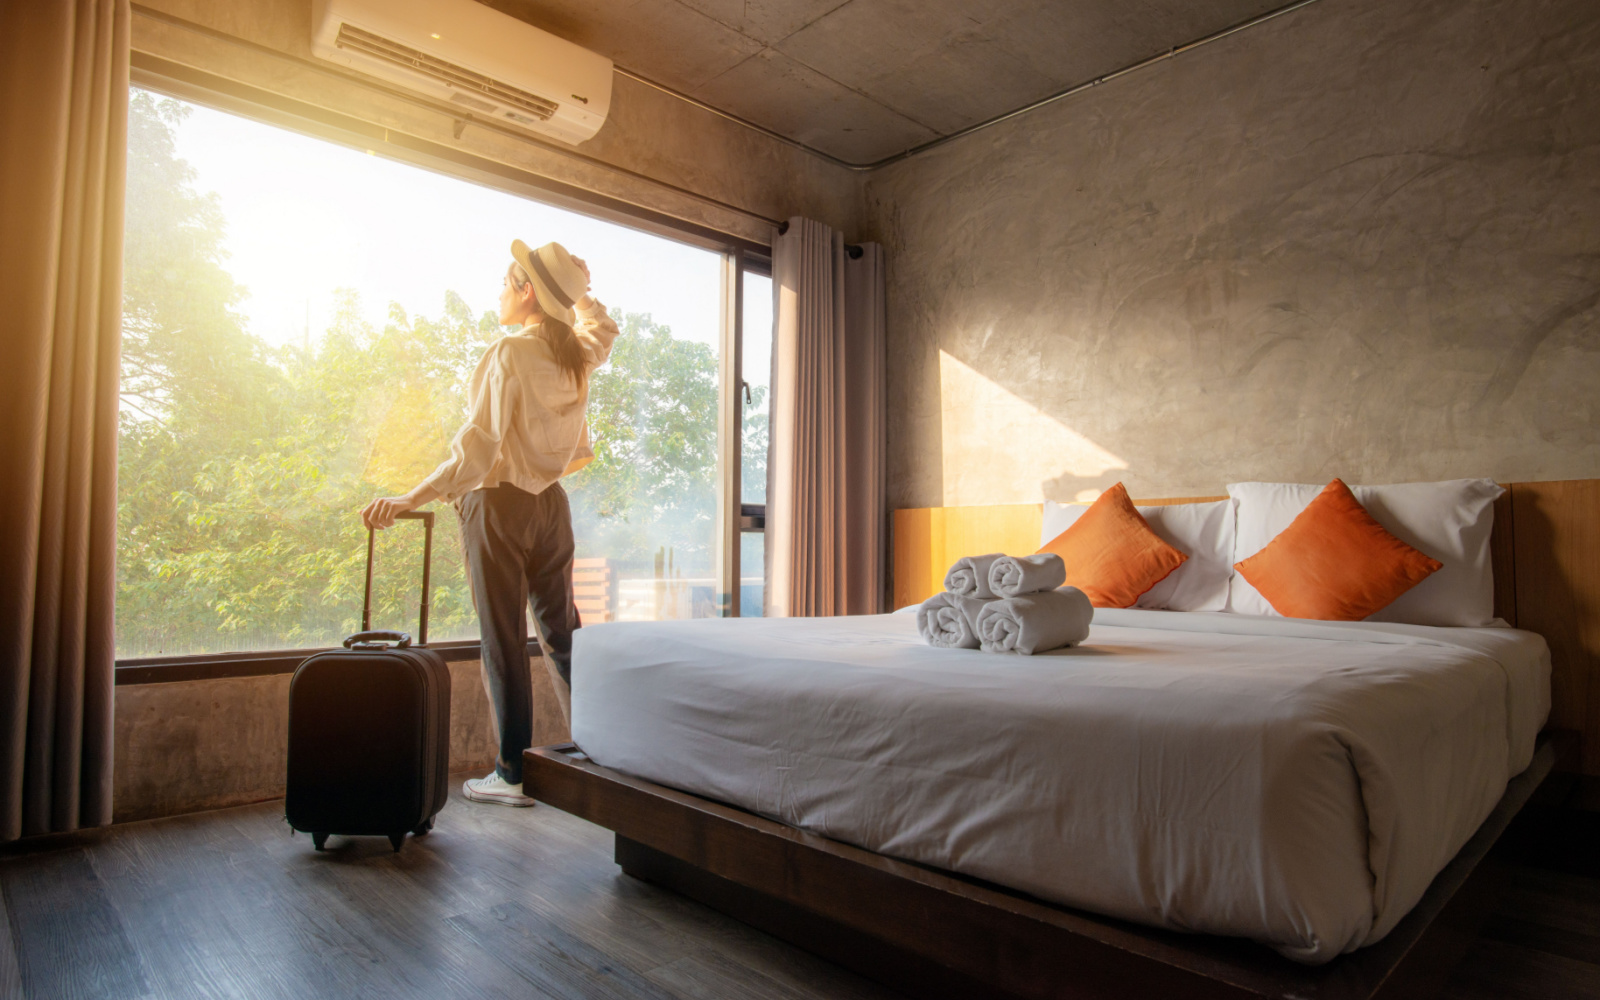 How to Get Free Hotel Rooms With 8 Simple Tricks